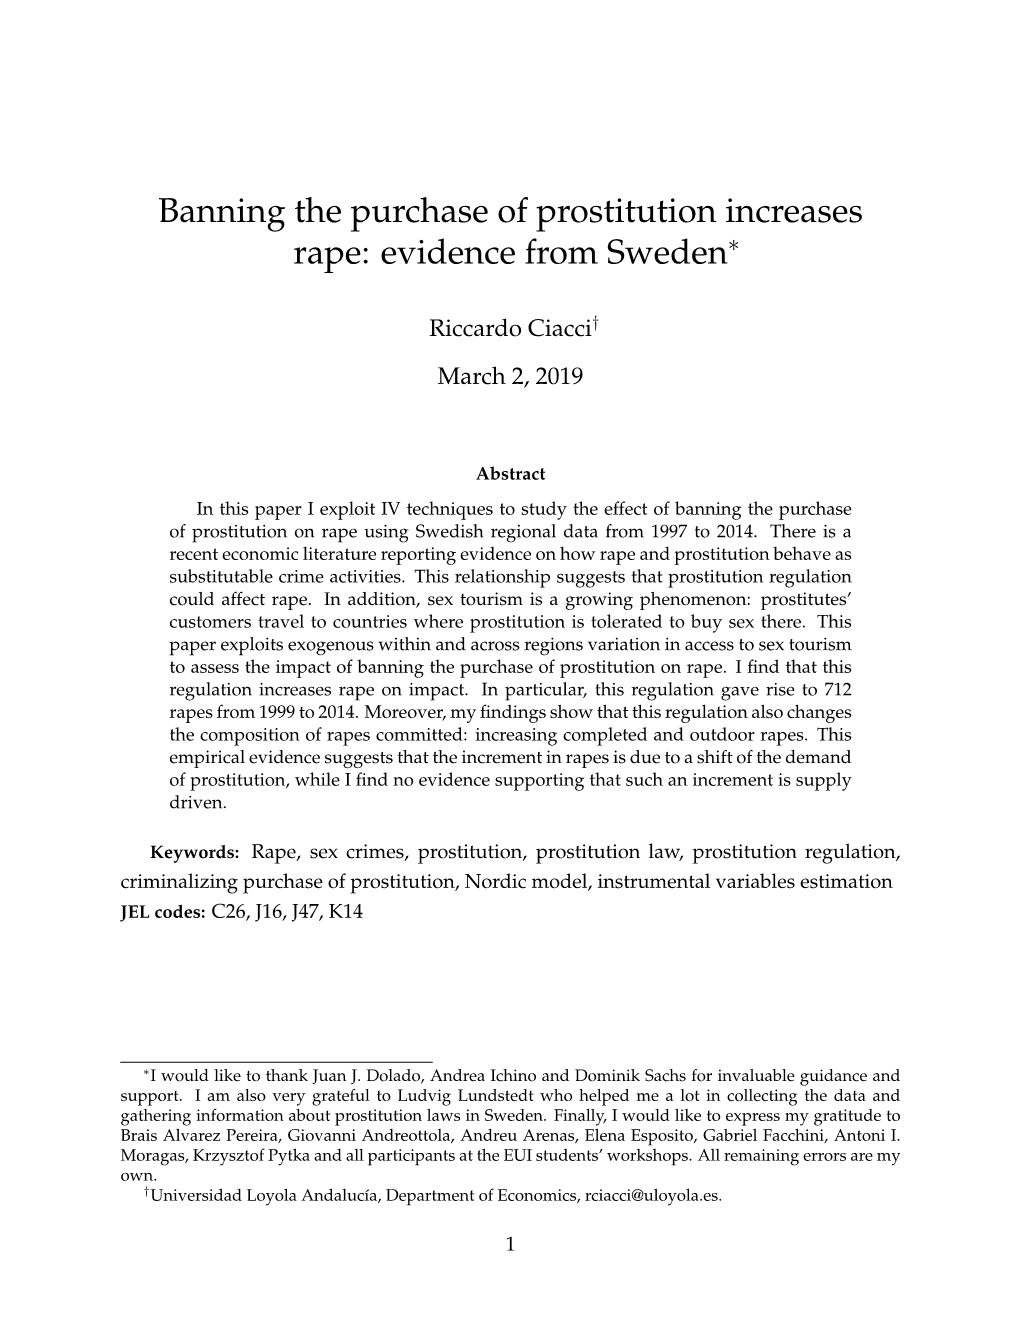 Banning the Purchase of Prostitution Increases Rape: Evidence from Sweden∗